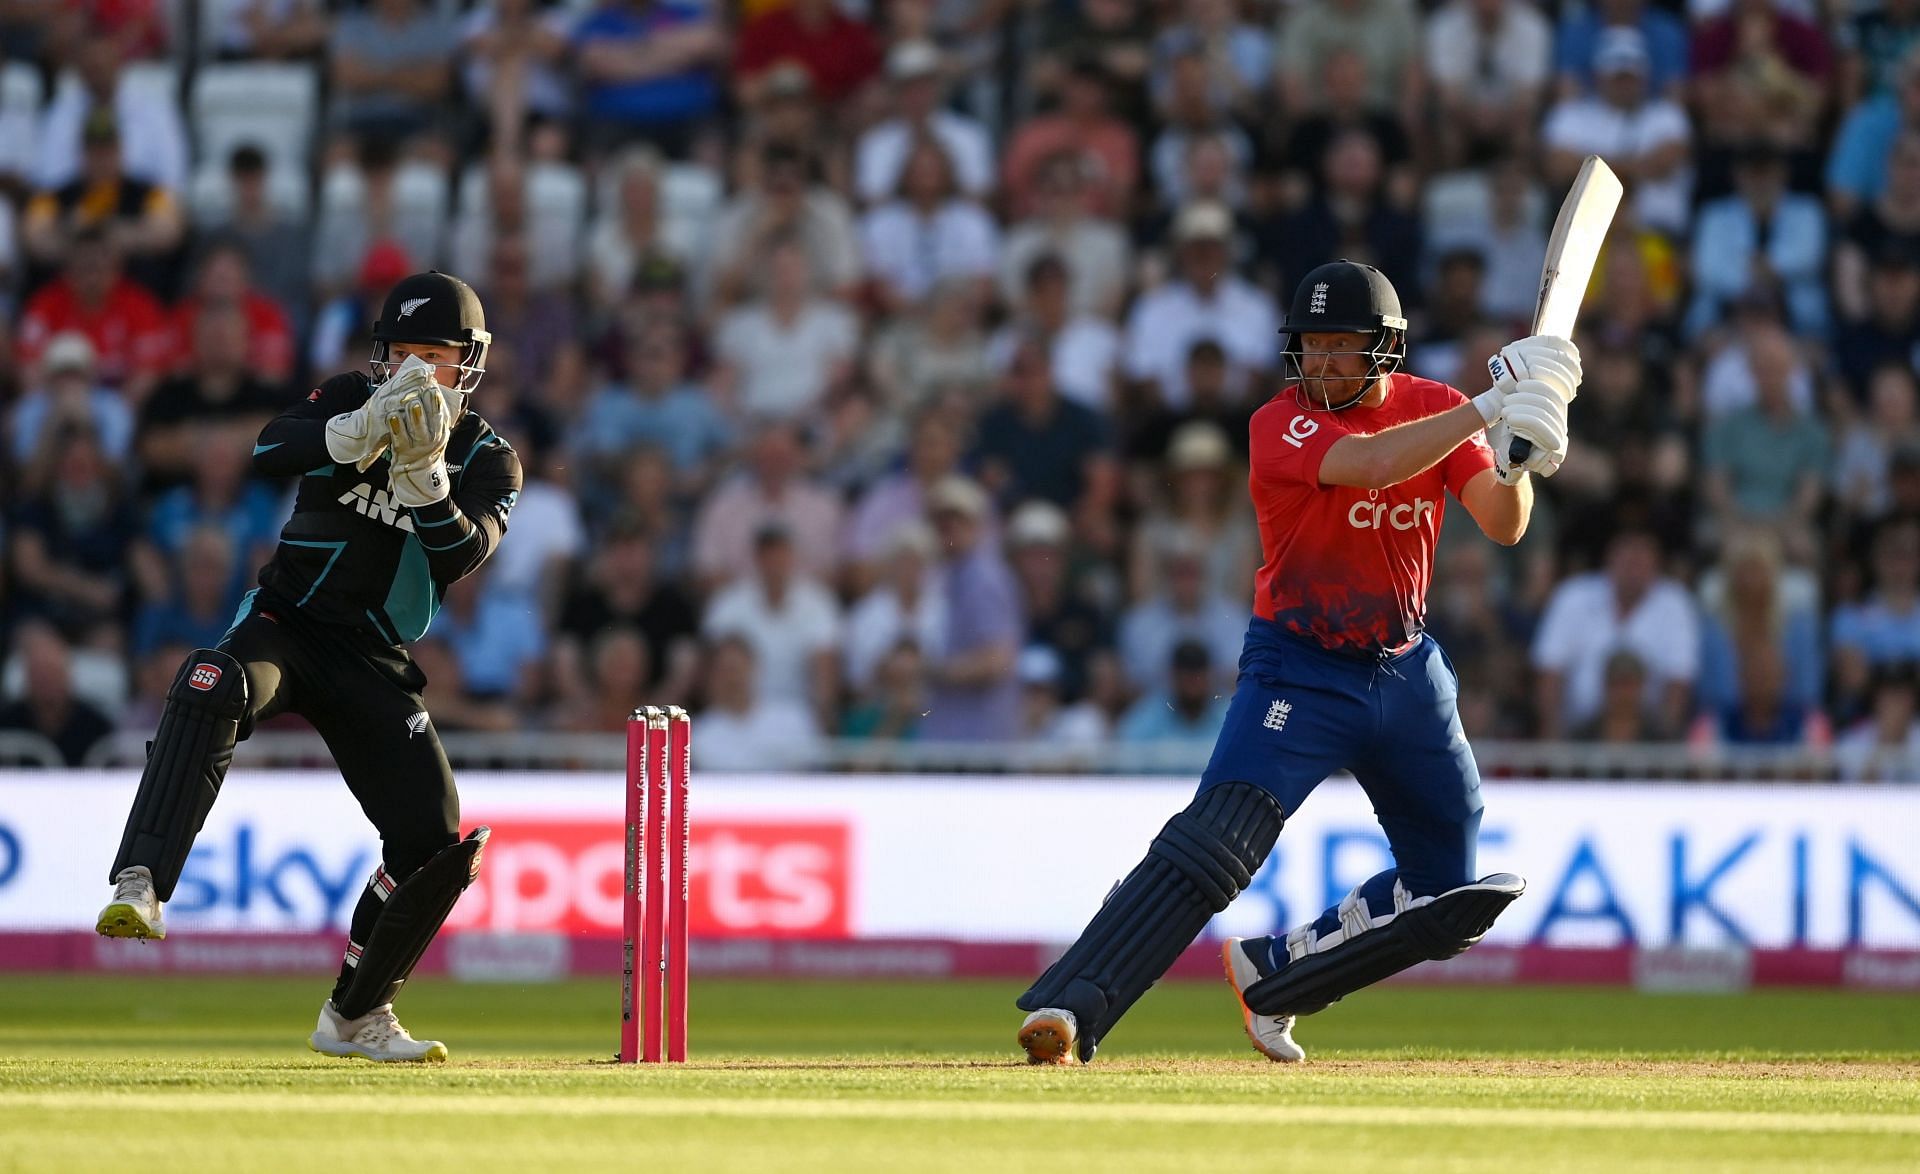 Jonny Bairstow batting in a T20I against New Zealand